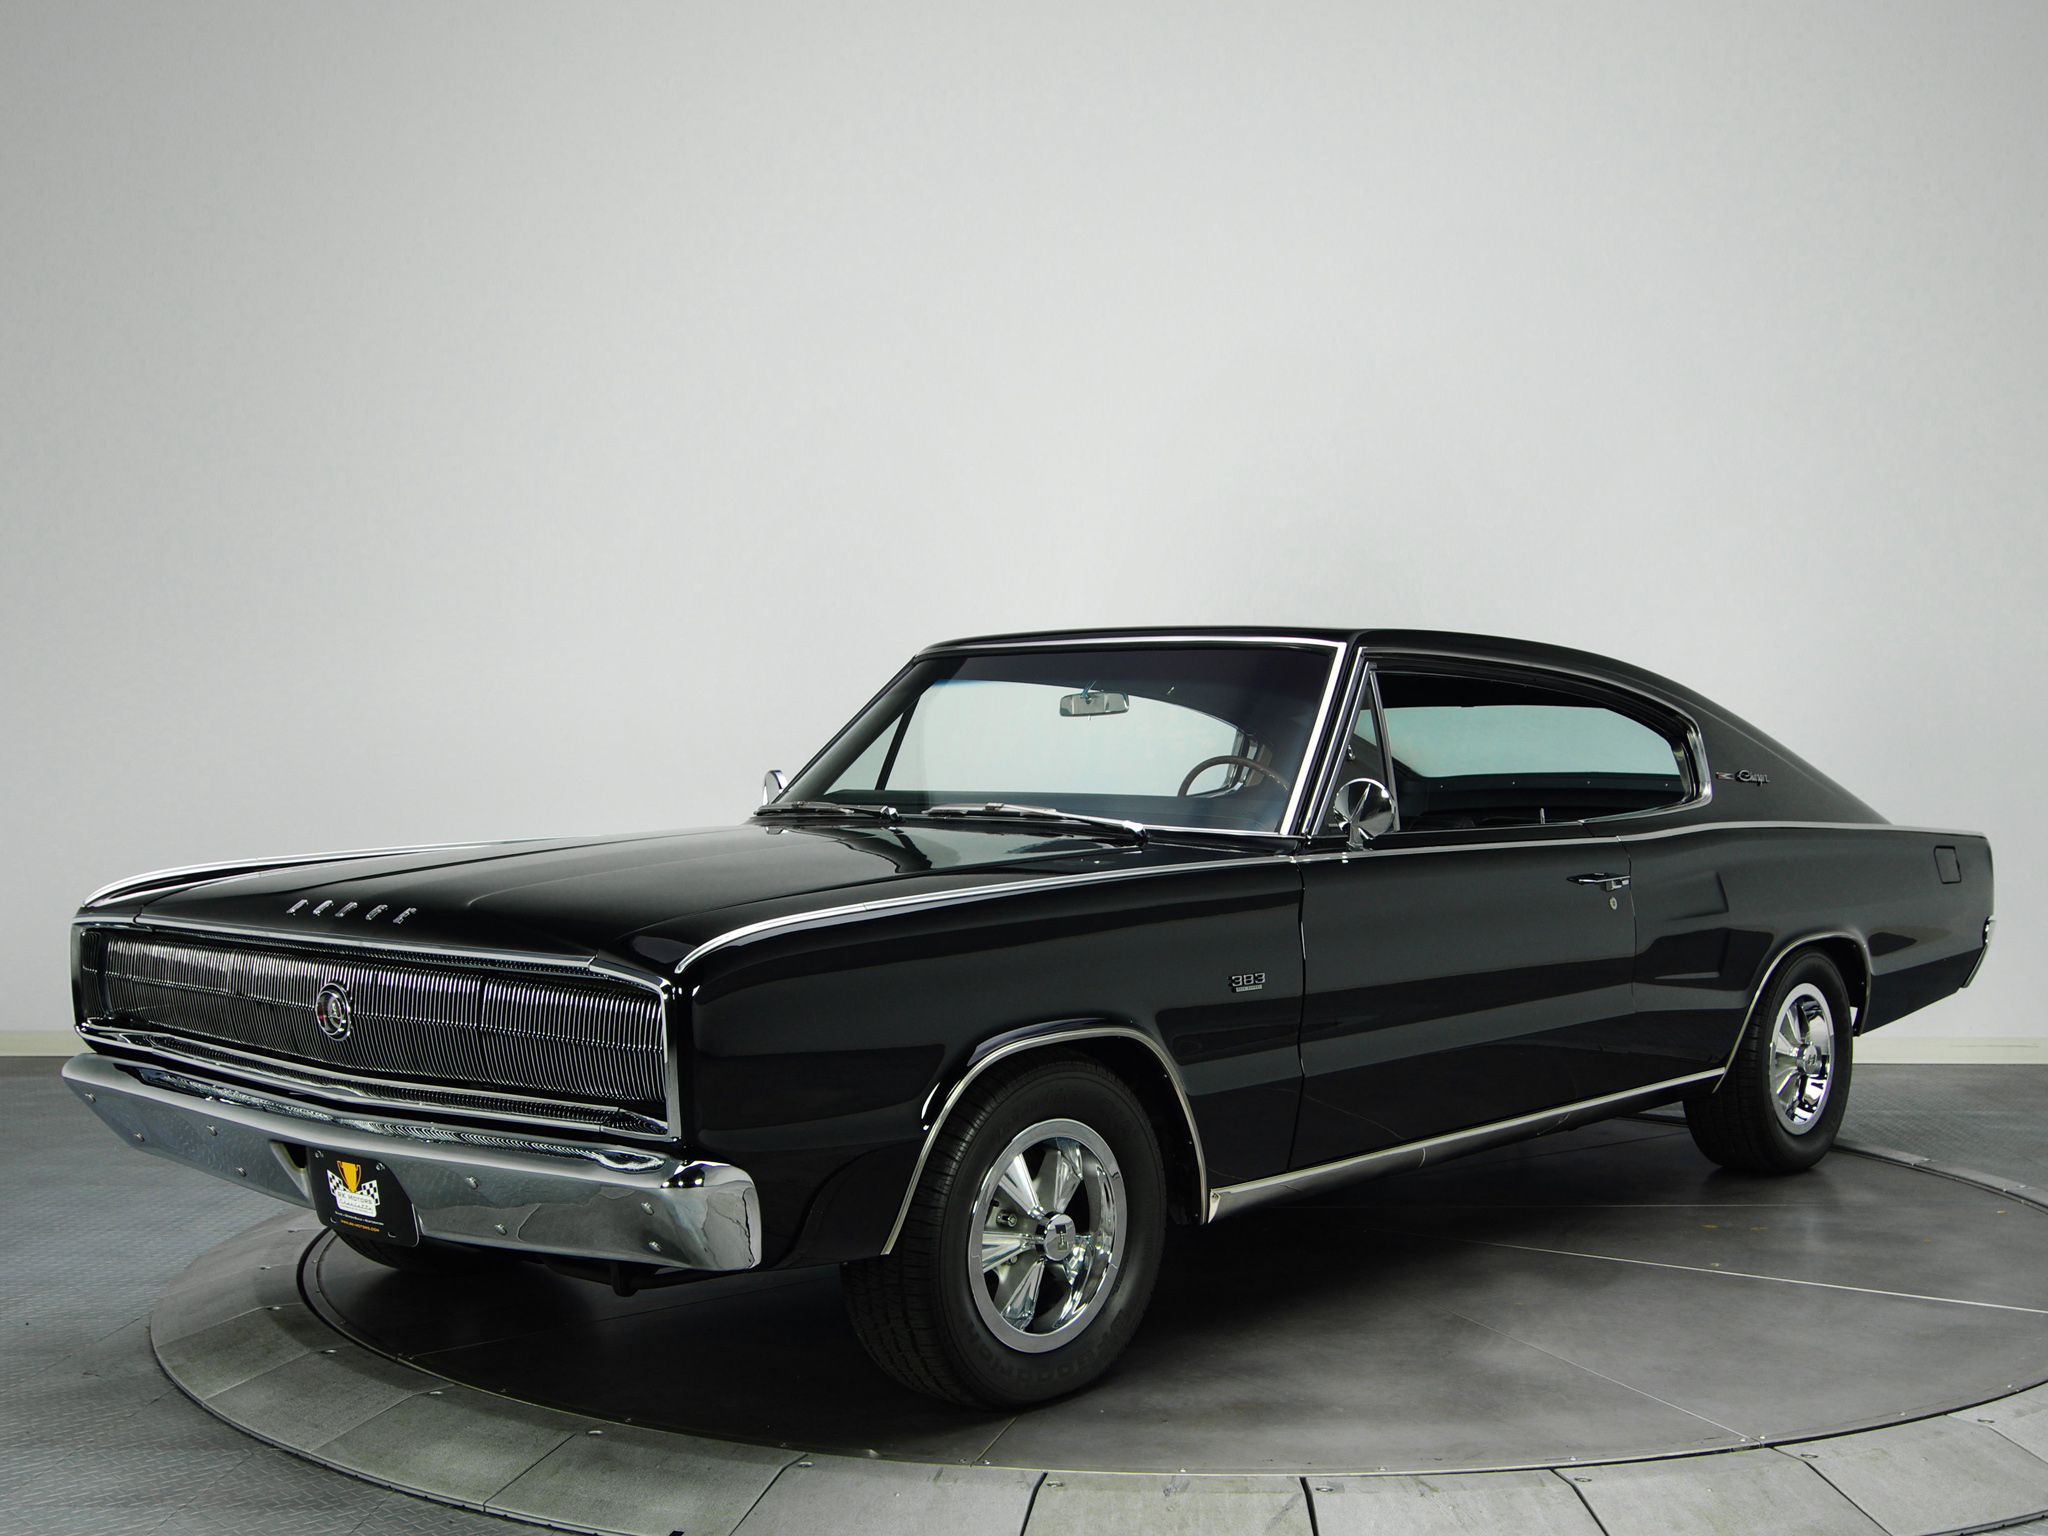 You can vote for this Dodge Charger 383 photo